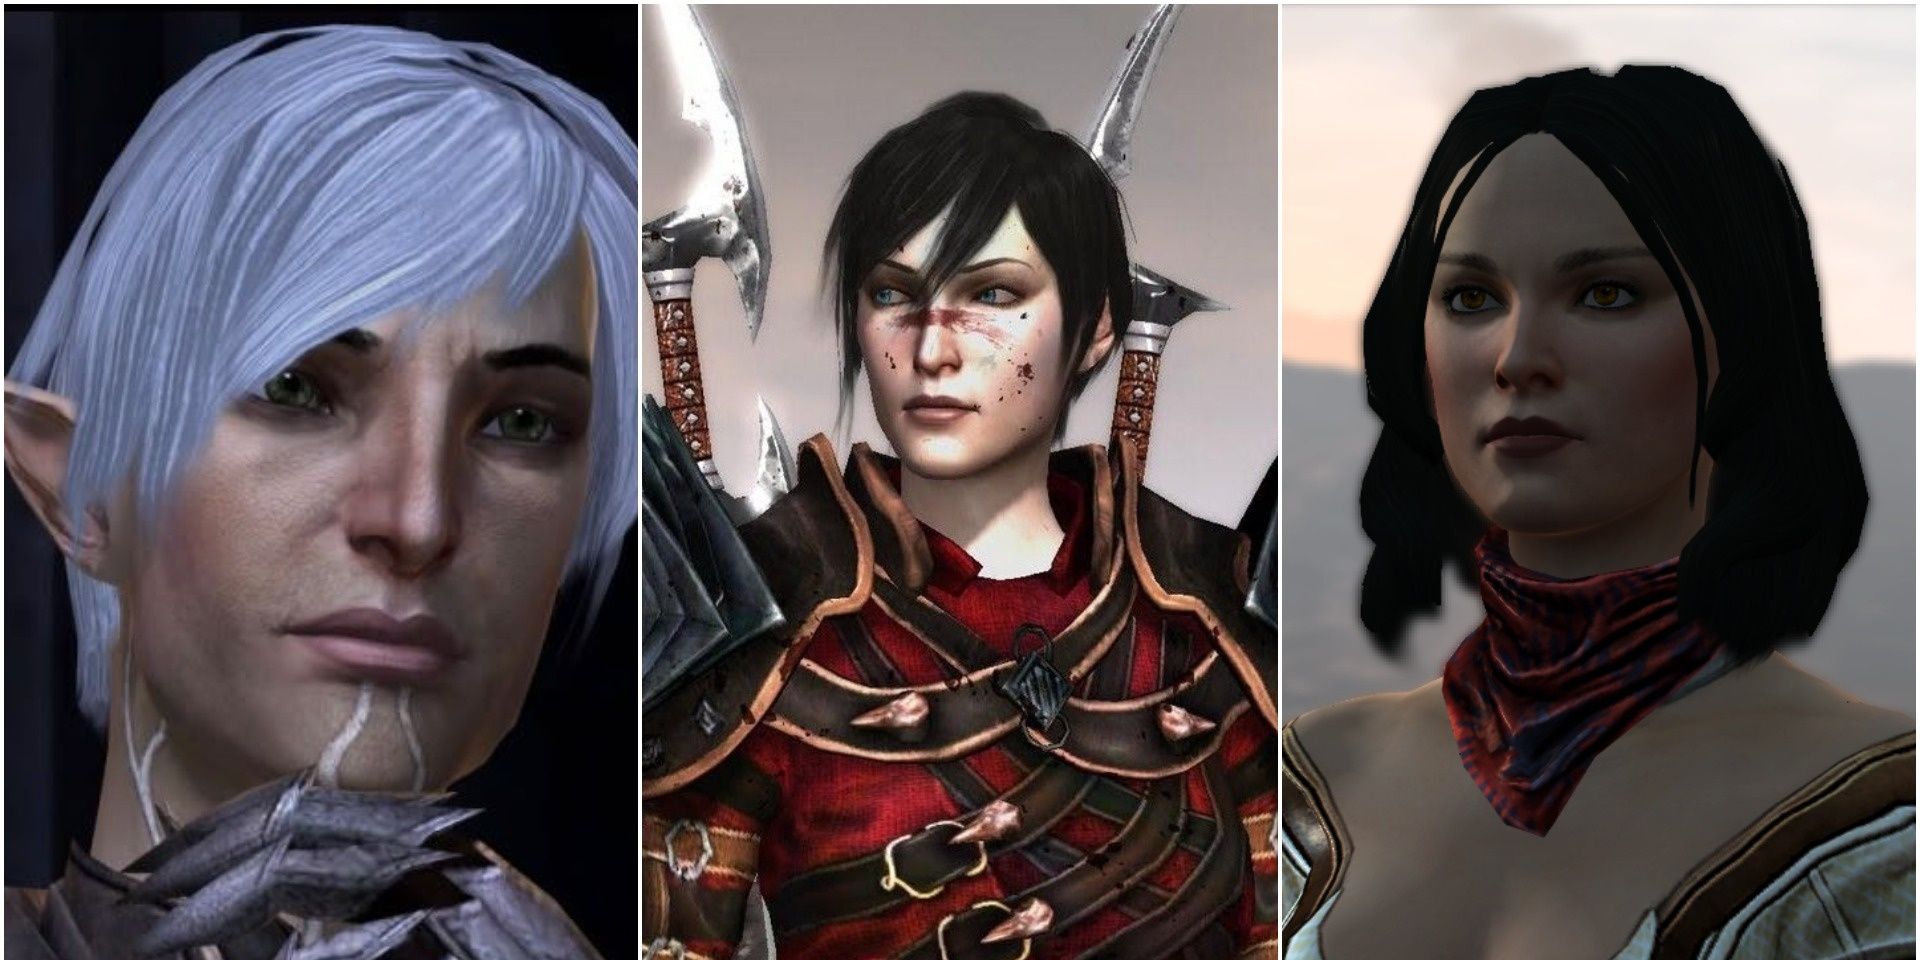 fjerkræ Villain Okklusion Dragon Age II: The Companions Officially Ranked | CBR